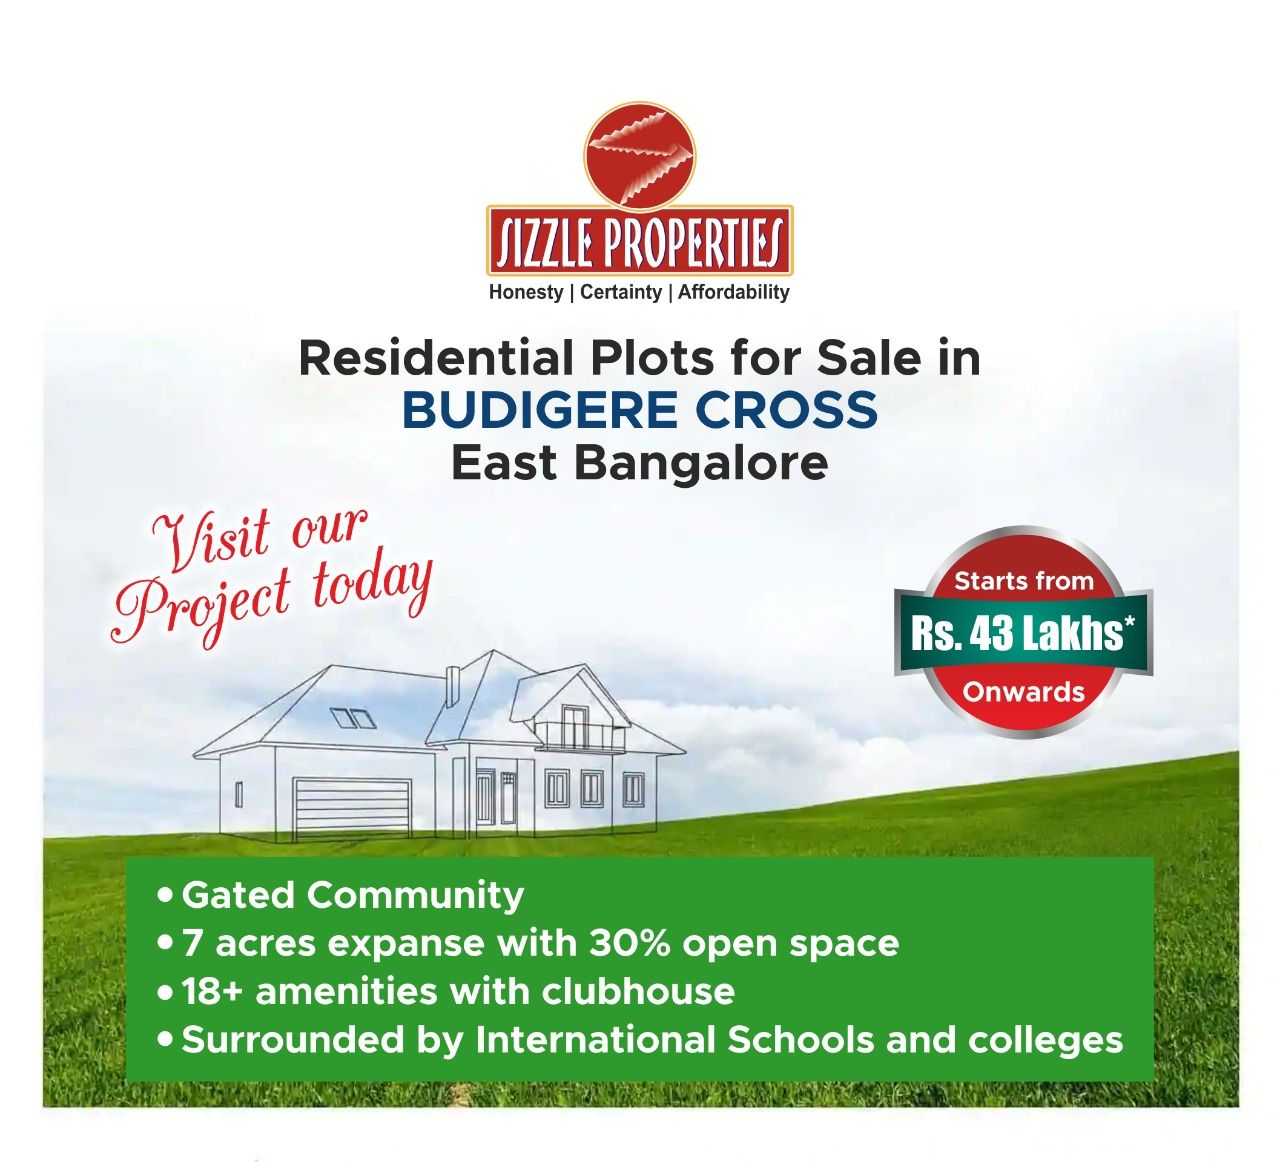 Sizzle Evergreen, BMRDA approved plots @ Budigere Cross